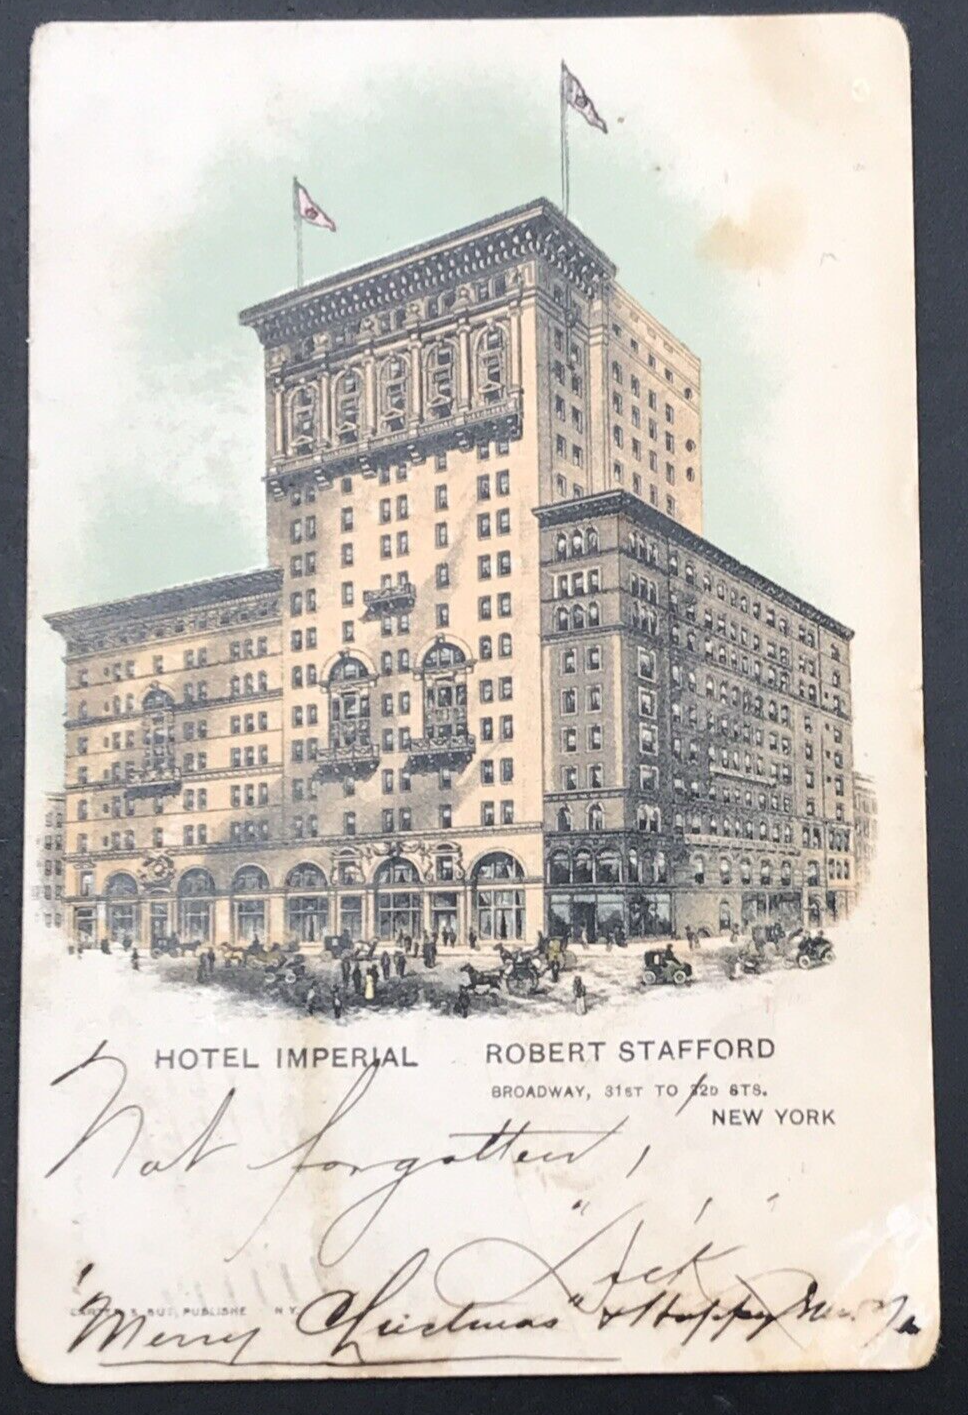 Primary image for 1904 Hotel Imperial New York NY Broadway Postcard Robert Stafford Proprietor